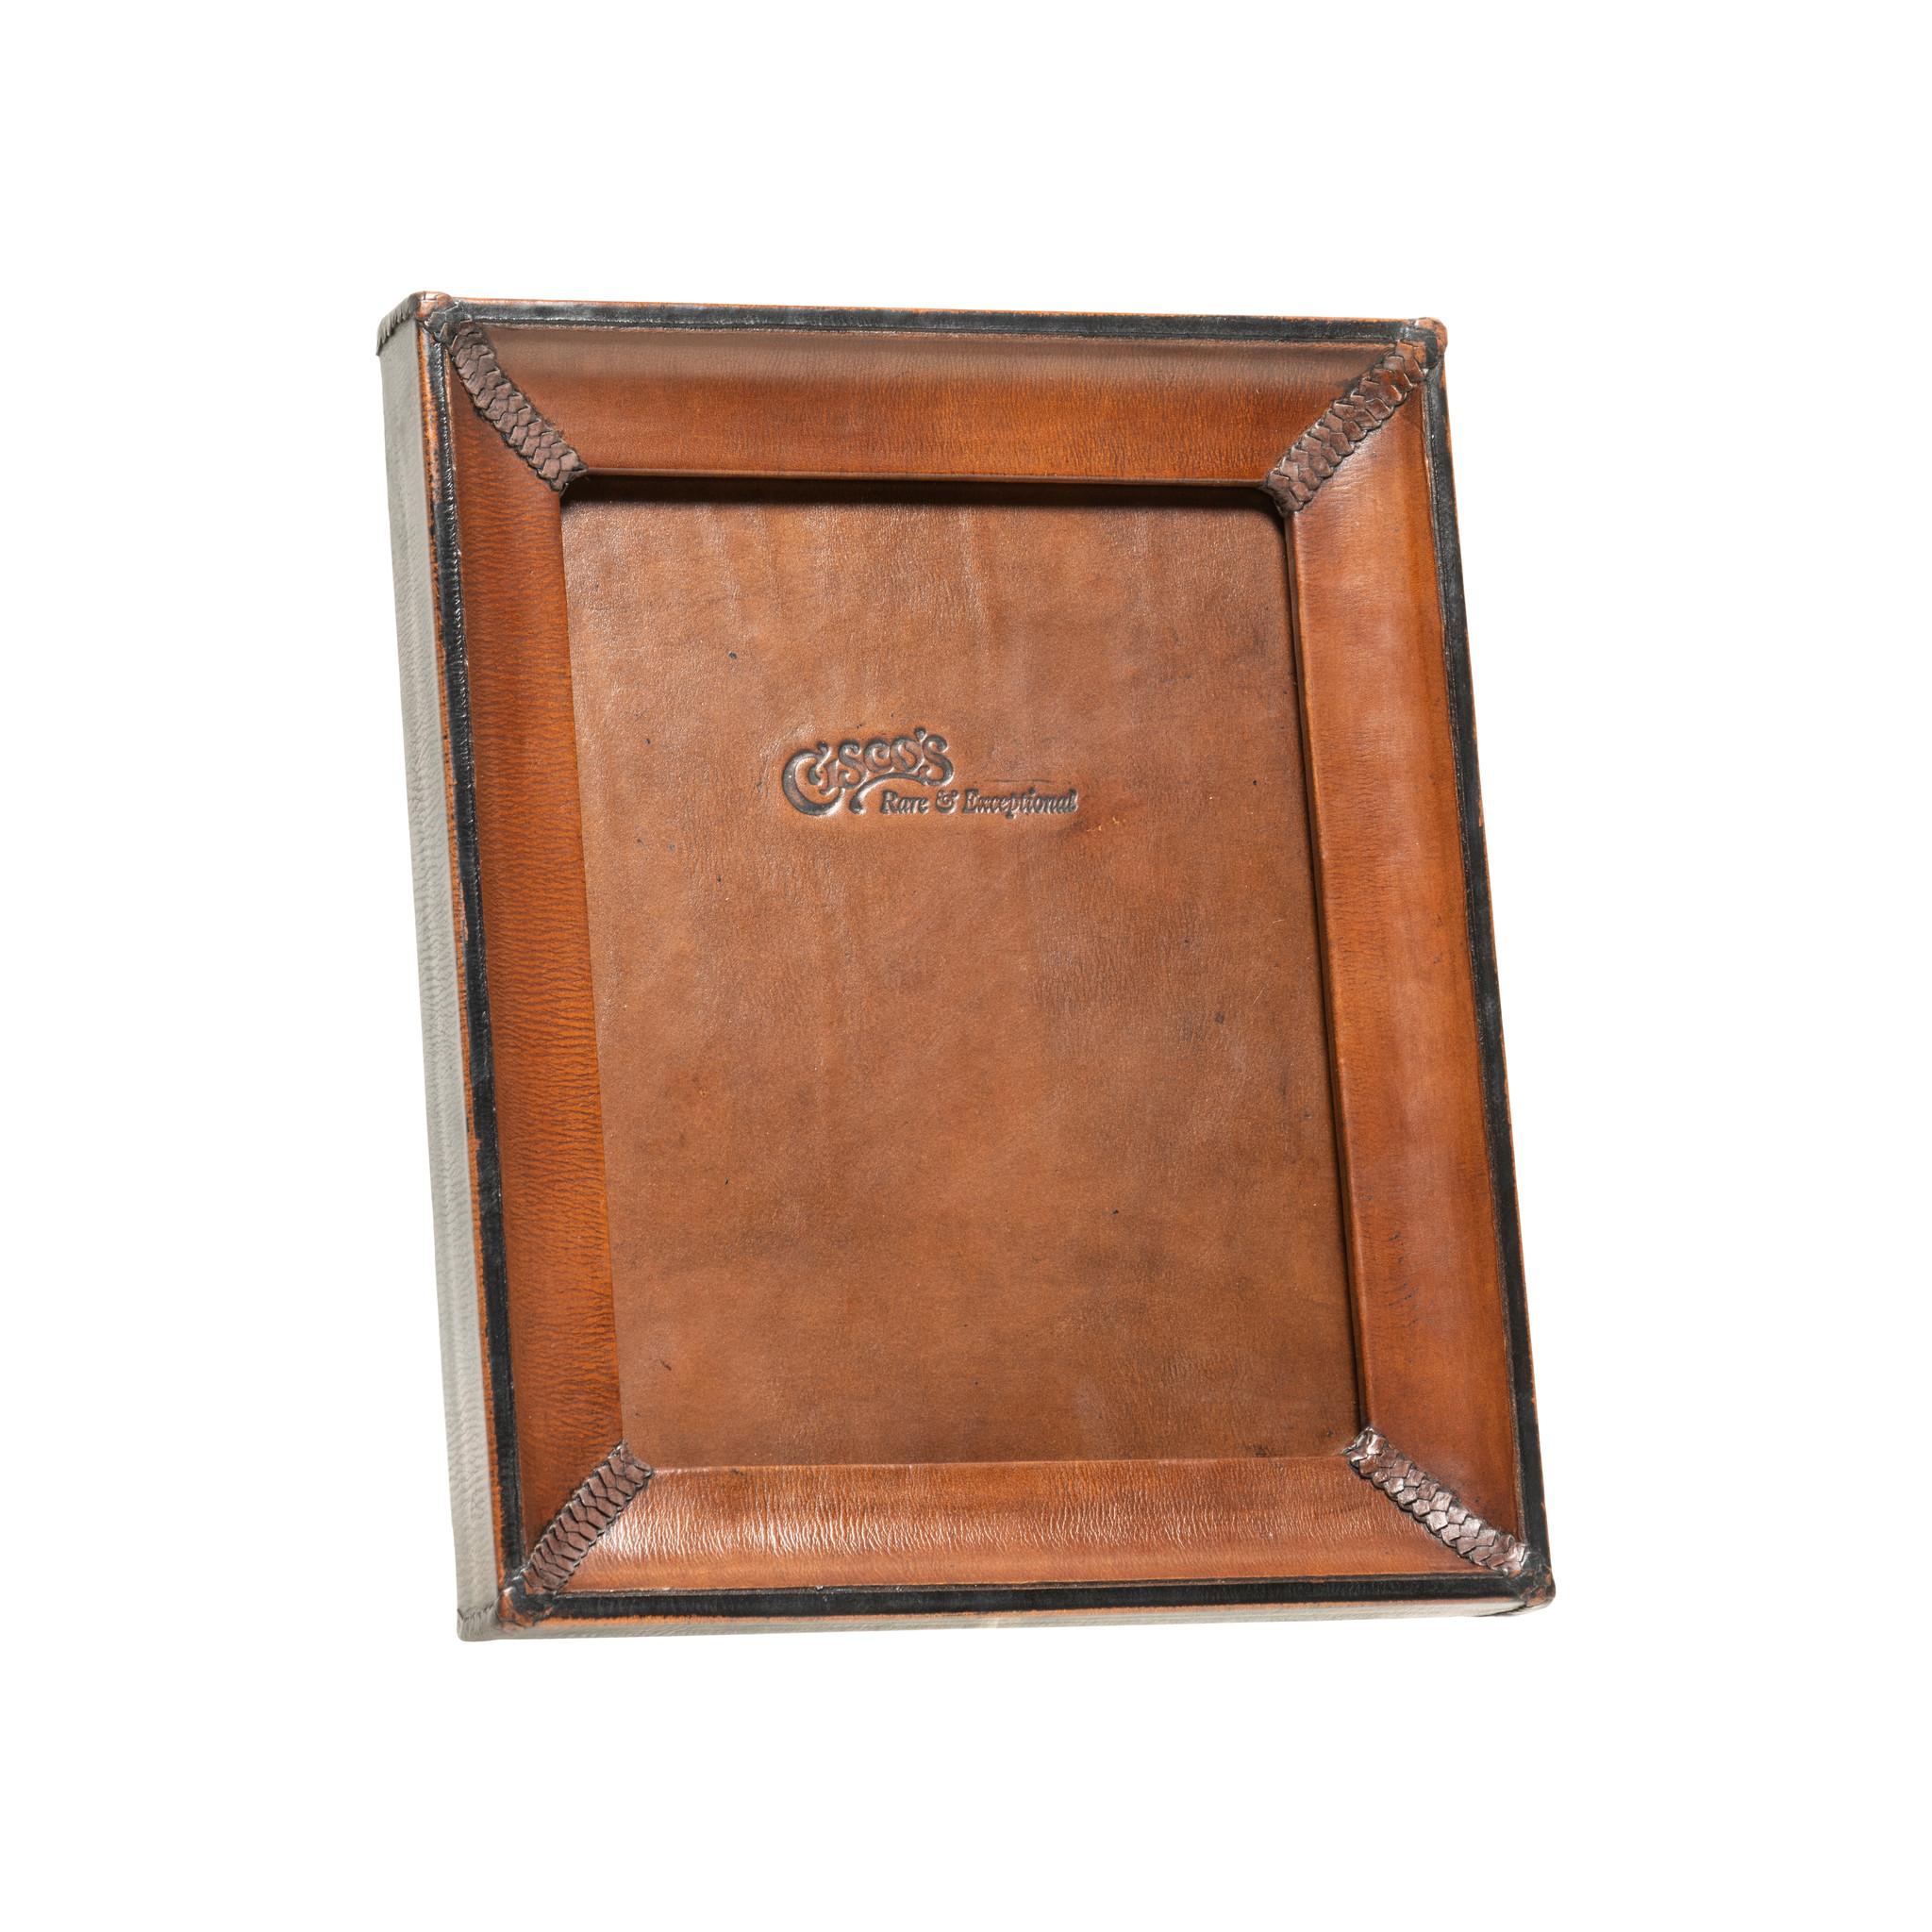 8x10 medium brown and black leather tabletop picture frame. Cisco's premium leather picture frames add the perfect accent to any home or office. Each frame is skillfully crafted by artisan saddle makers using genuine cowhide. Color: Dark brown with